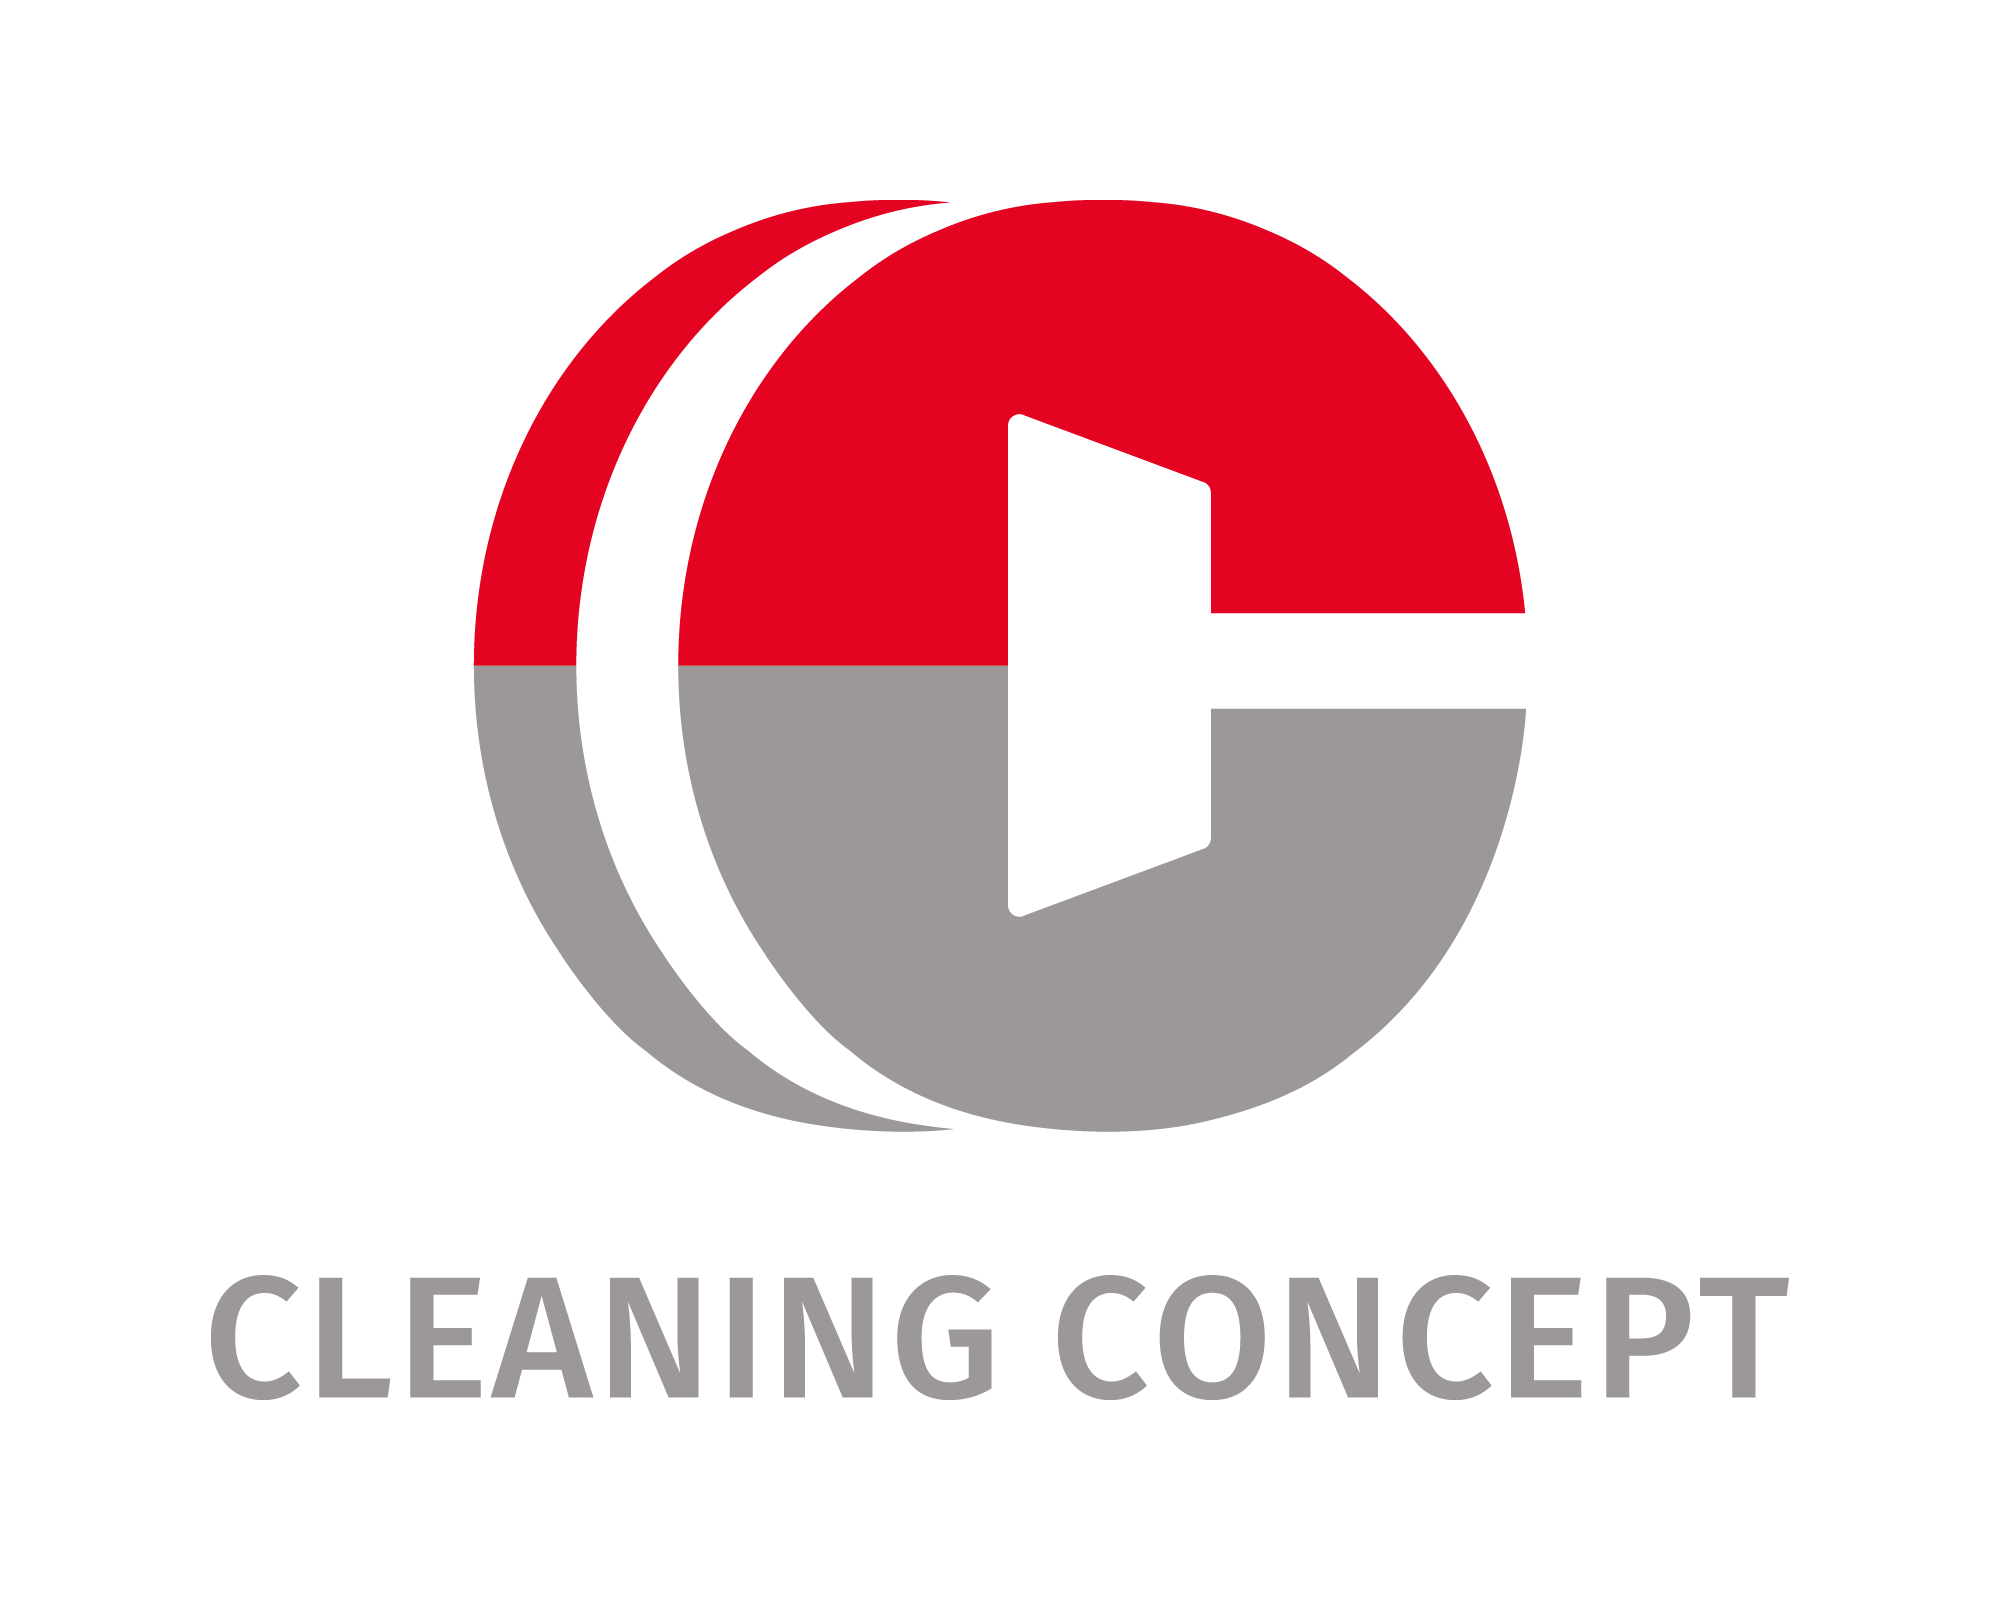 Cleaning Concept Pte. Ltd. company logo